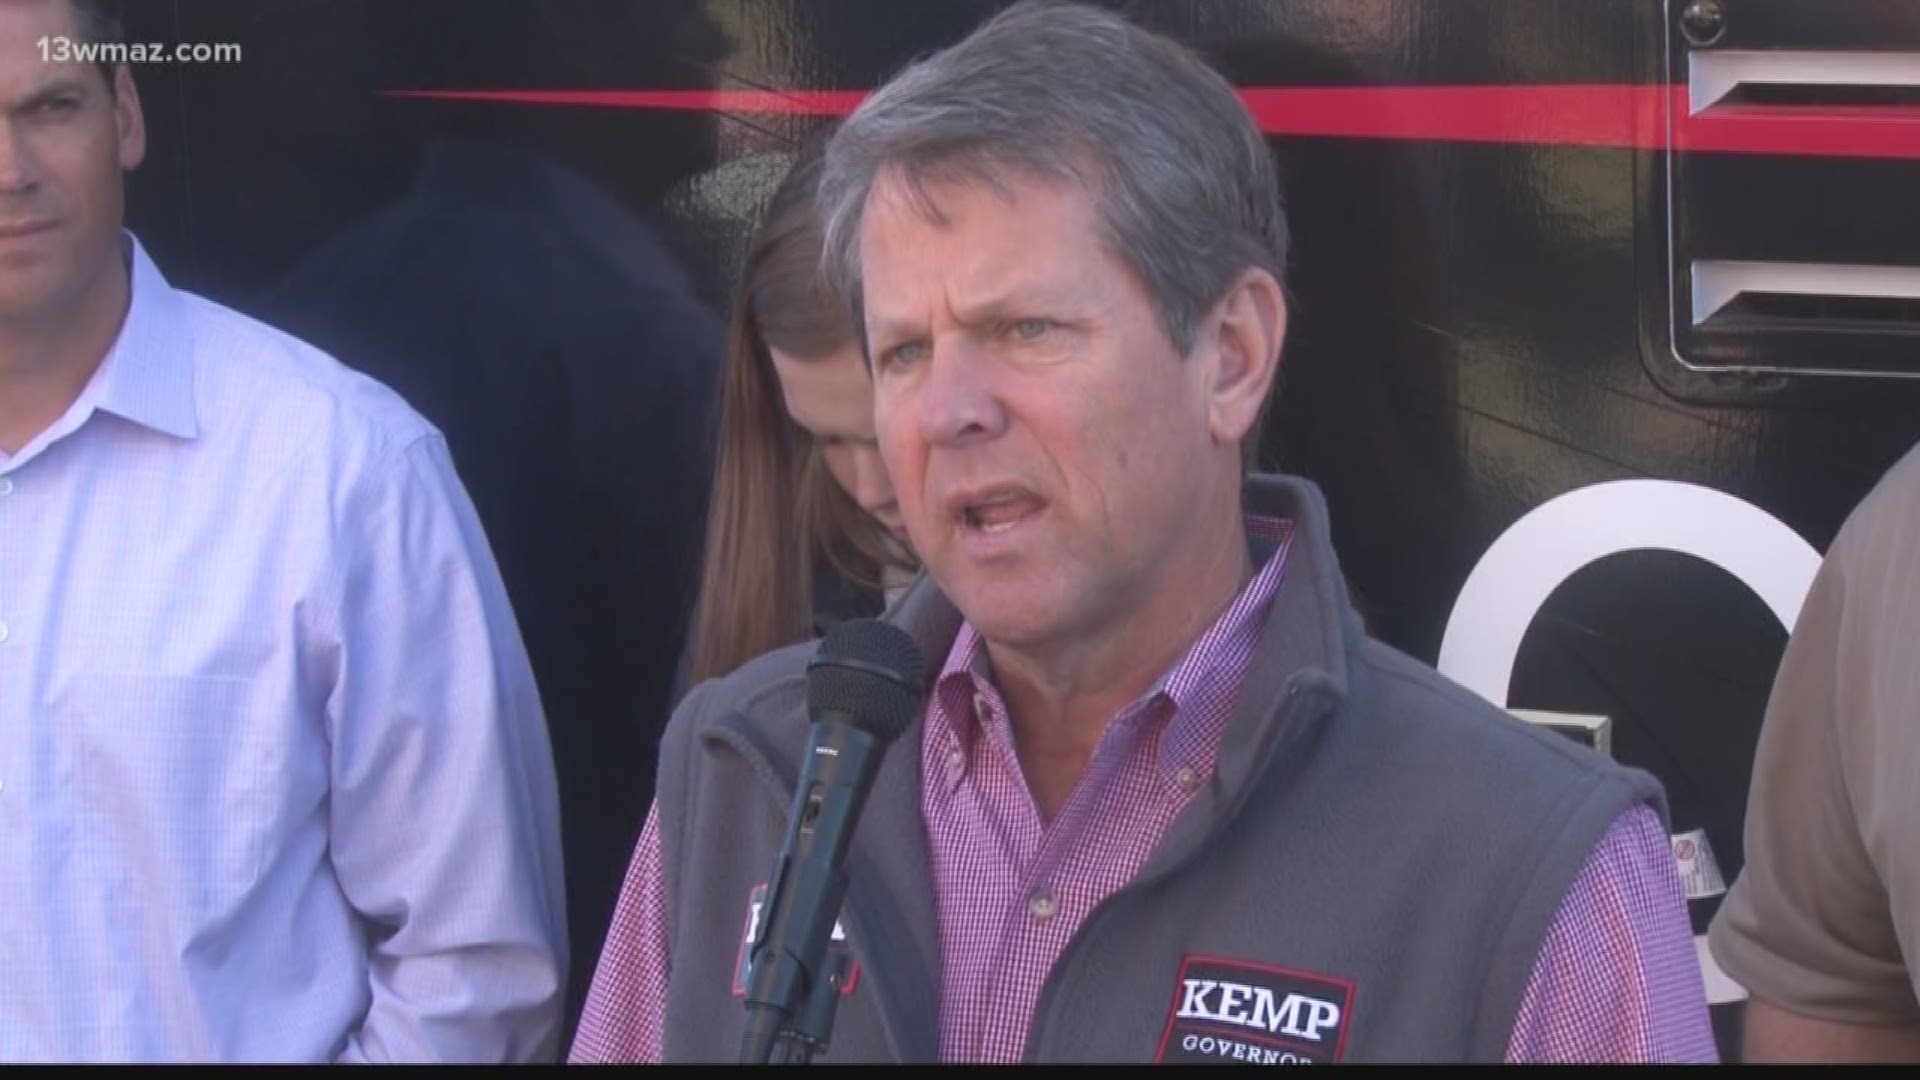 Brian Kemp stops in Central Ga. on campaign trail